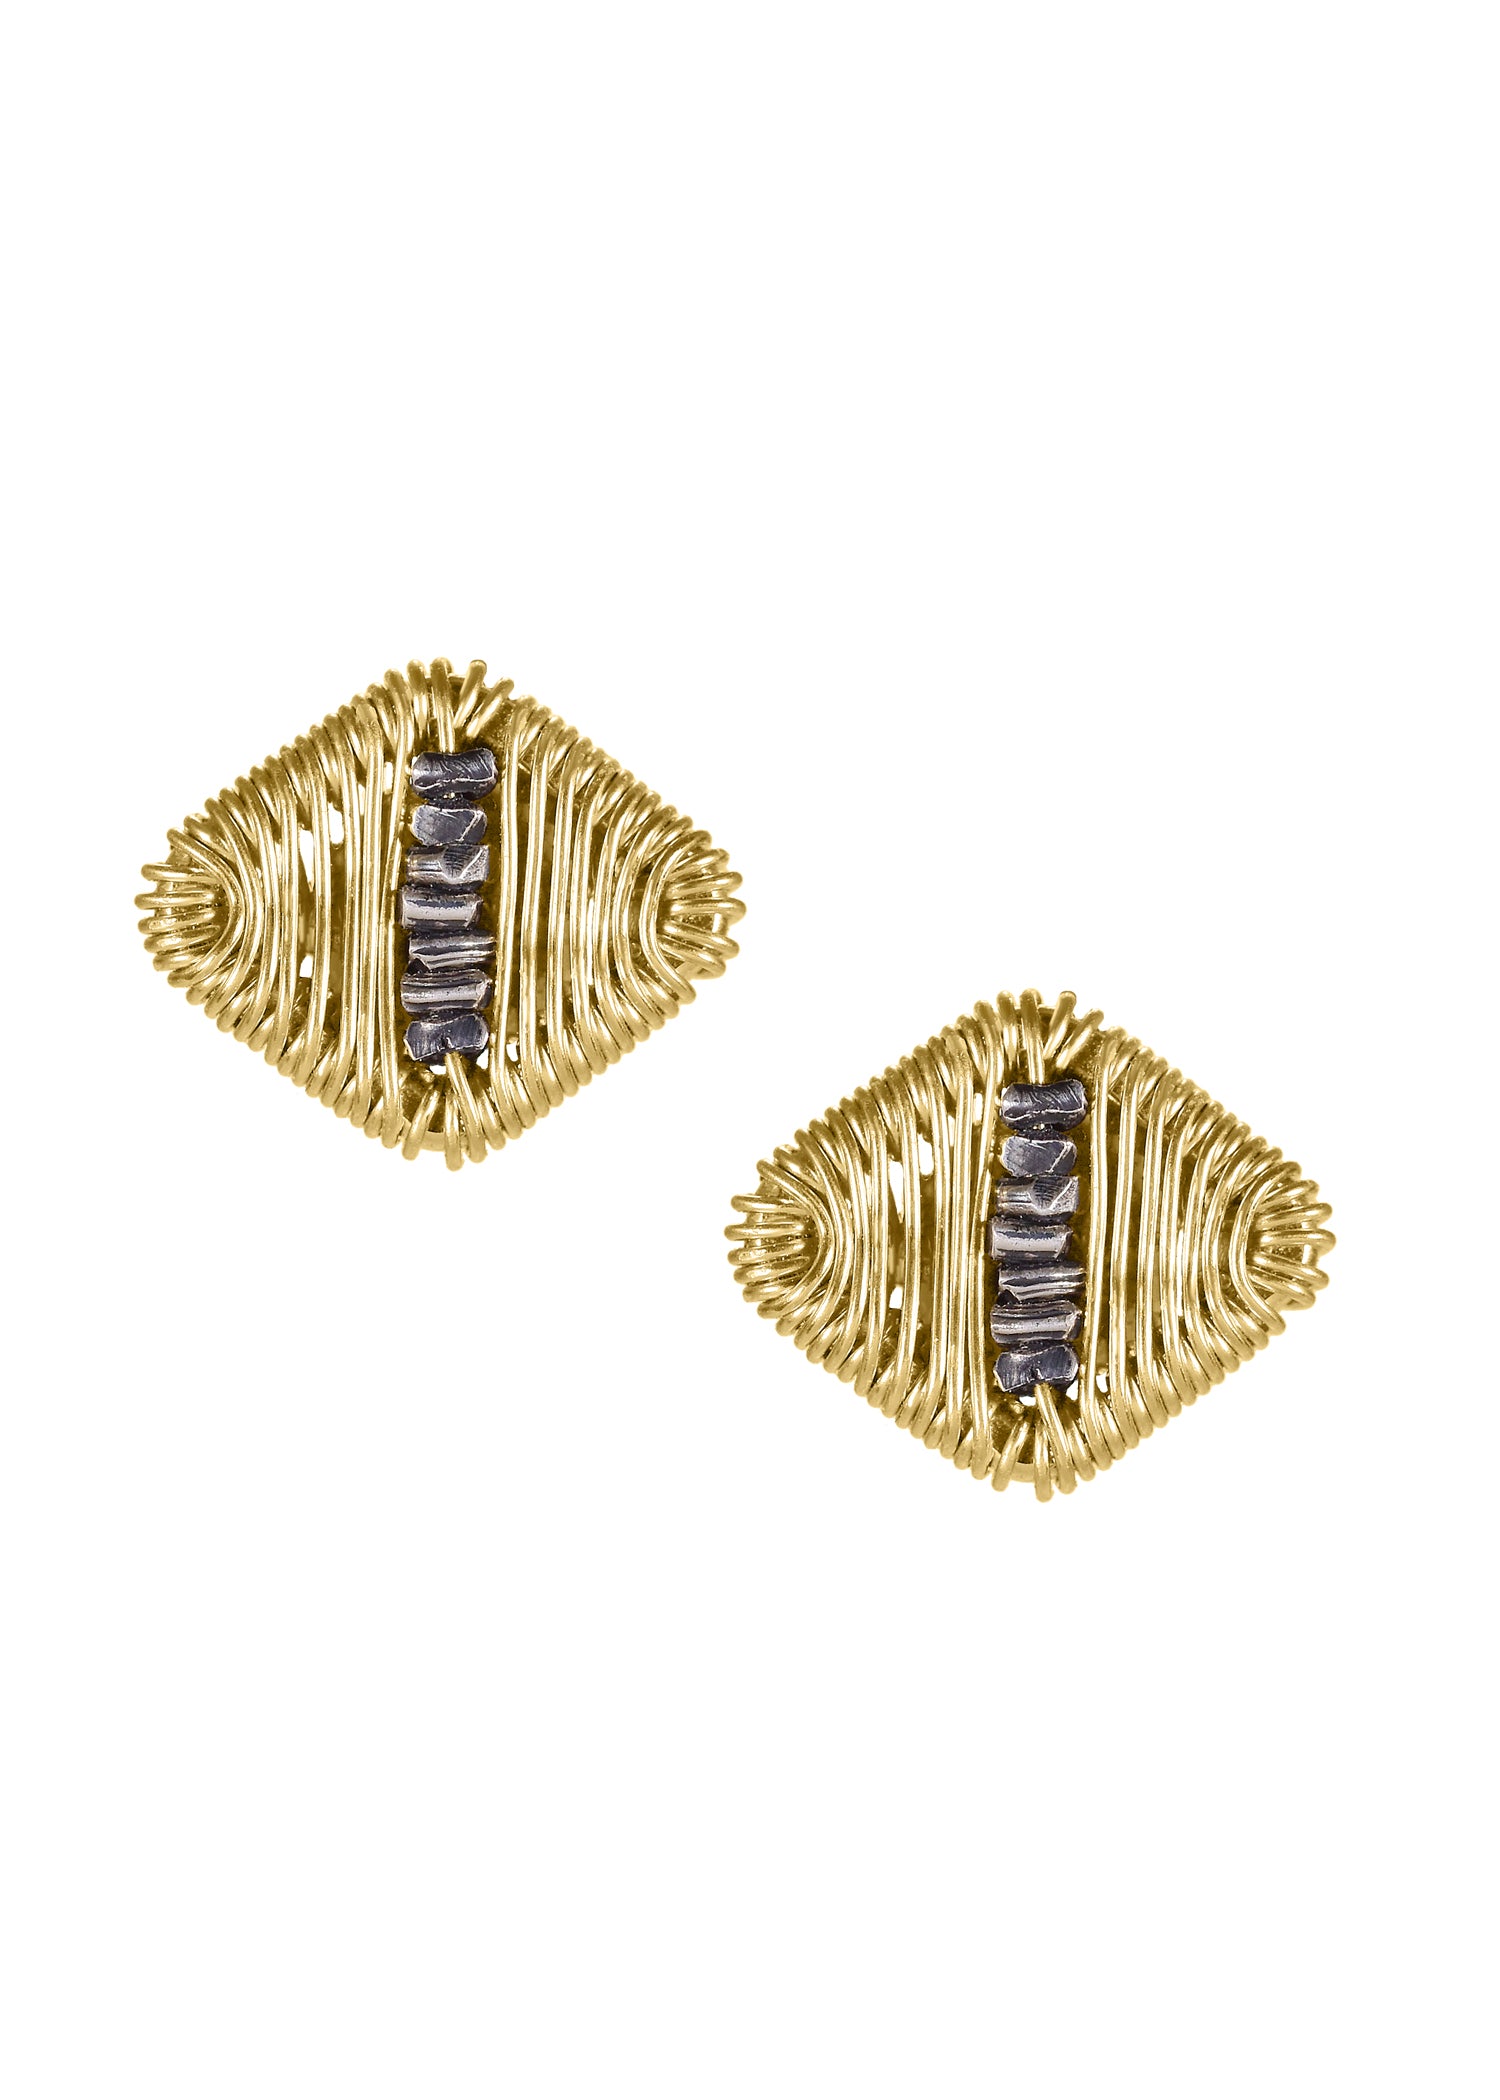 14k gold fill Sterling silver Mixed metal Earrings measure 3/8" in length and 7/16" in width Handmade in our Los Angeles studio